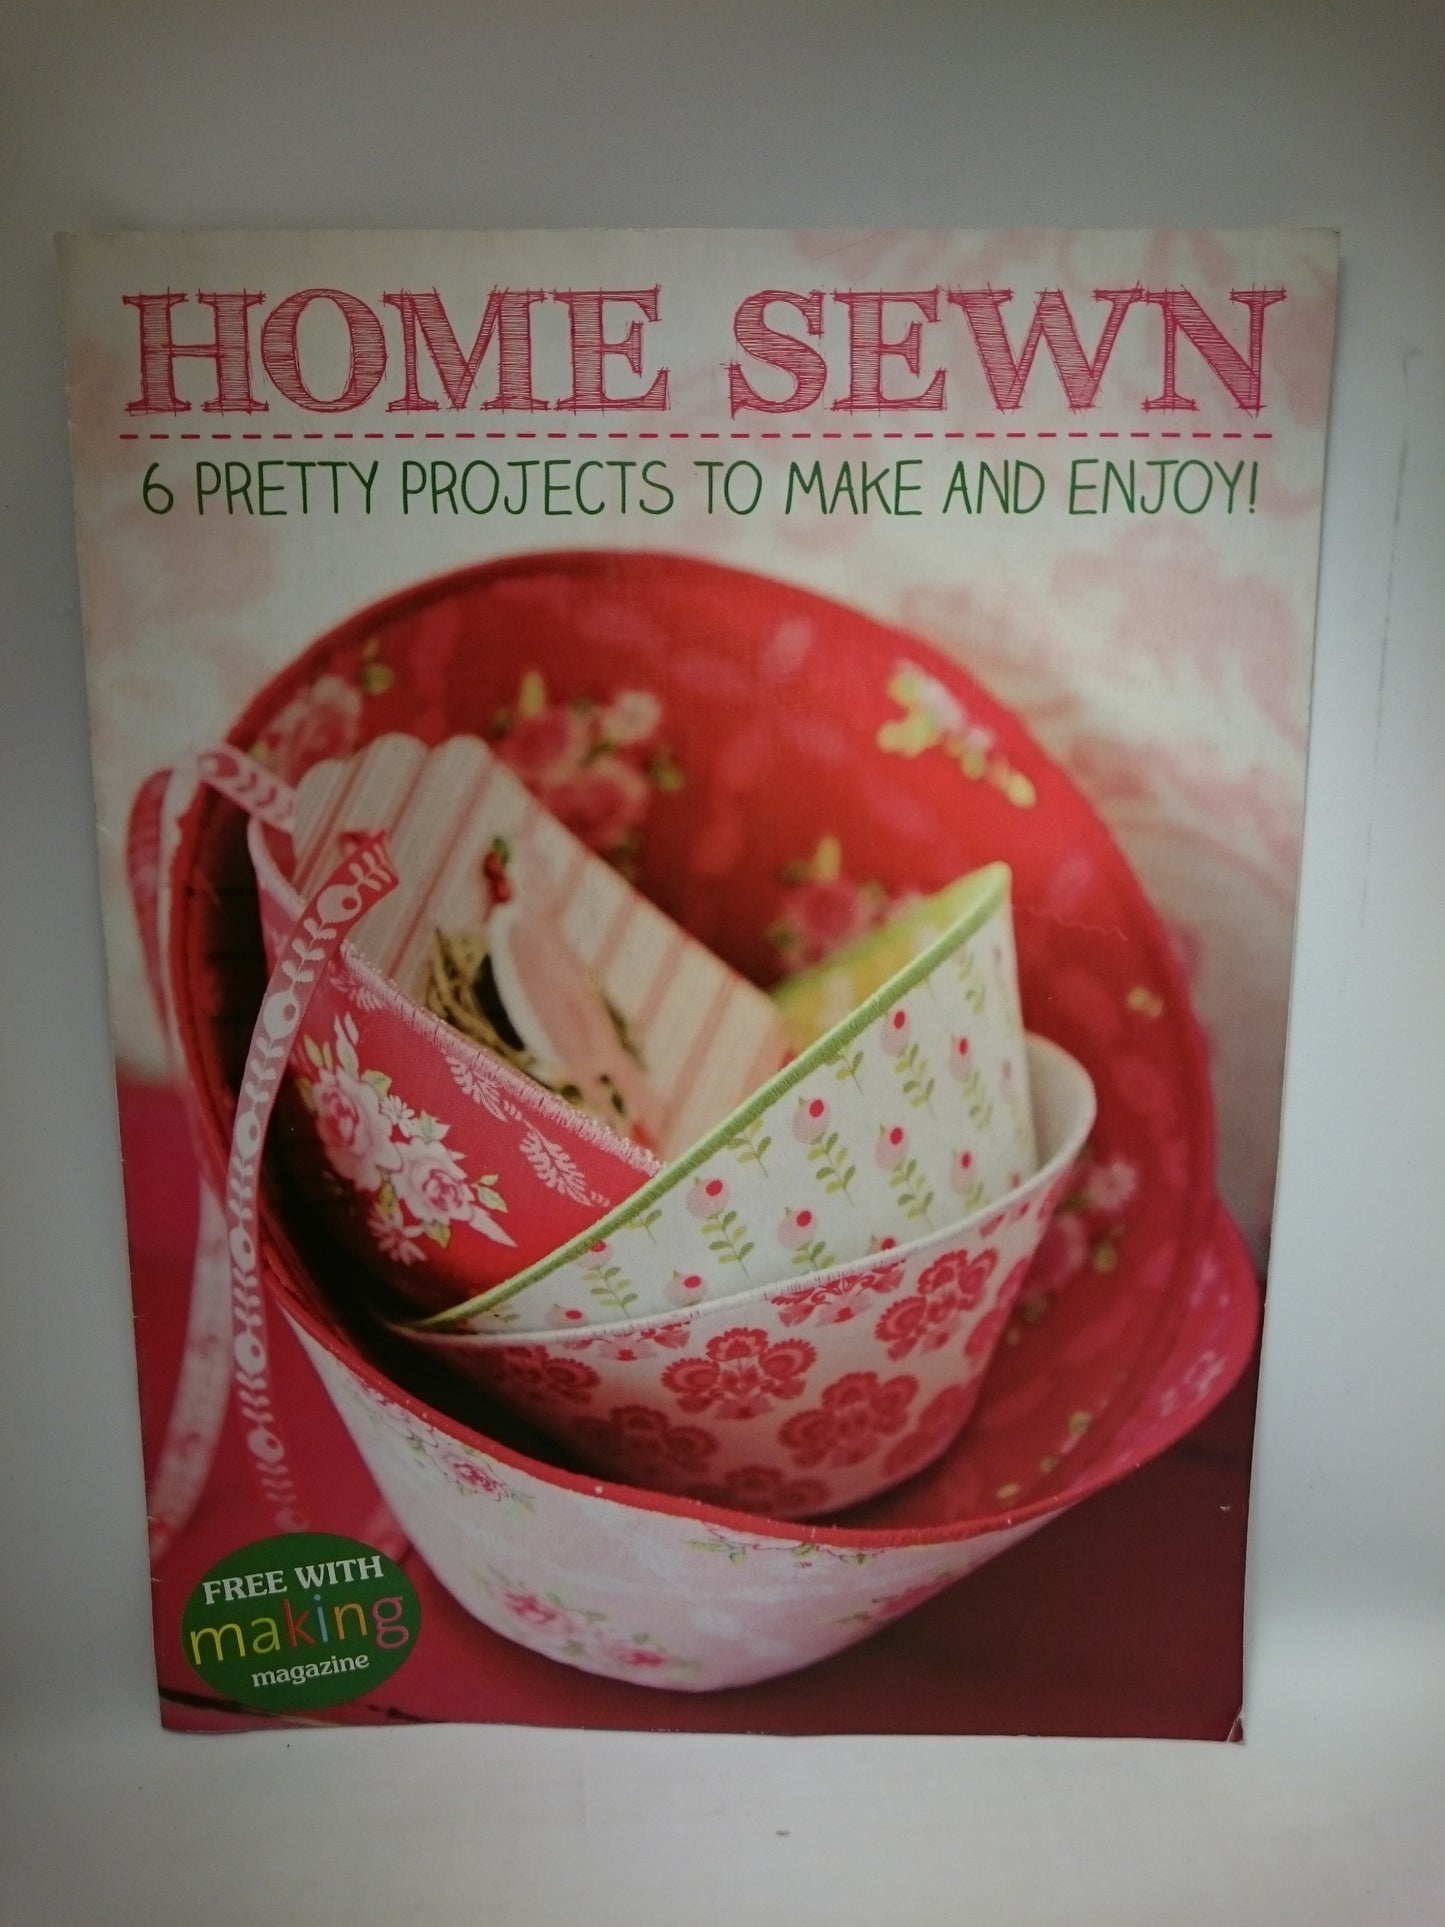 Home Sewn 6 pretty projects to make and enjoy